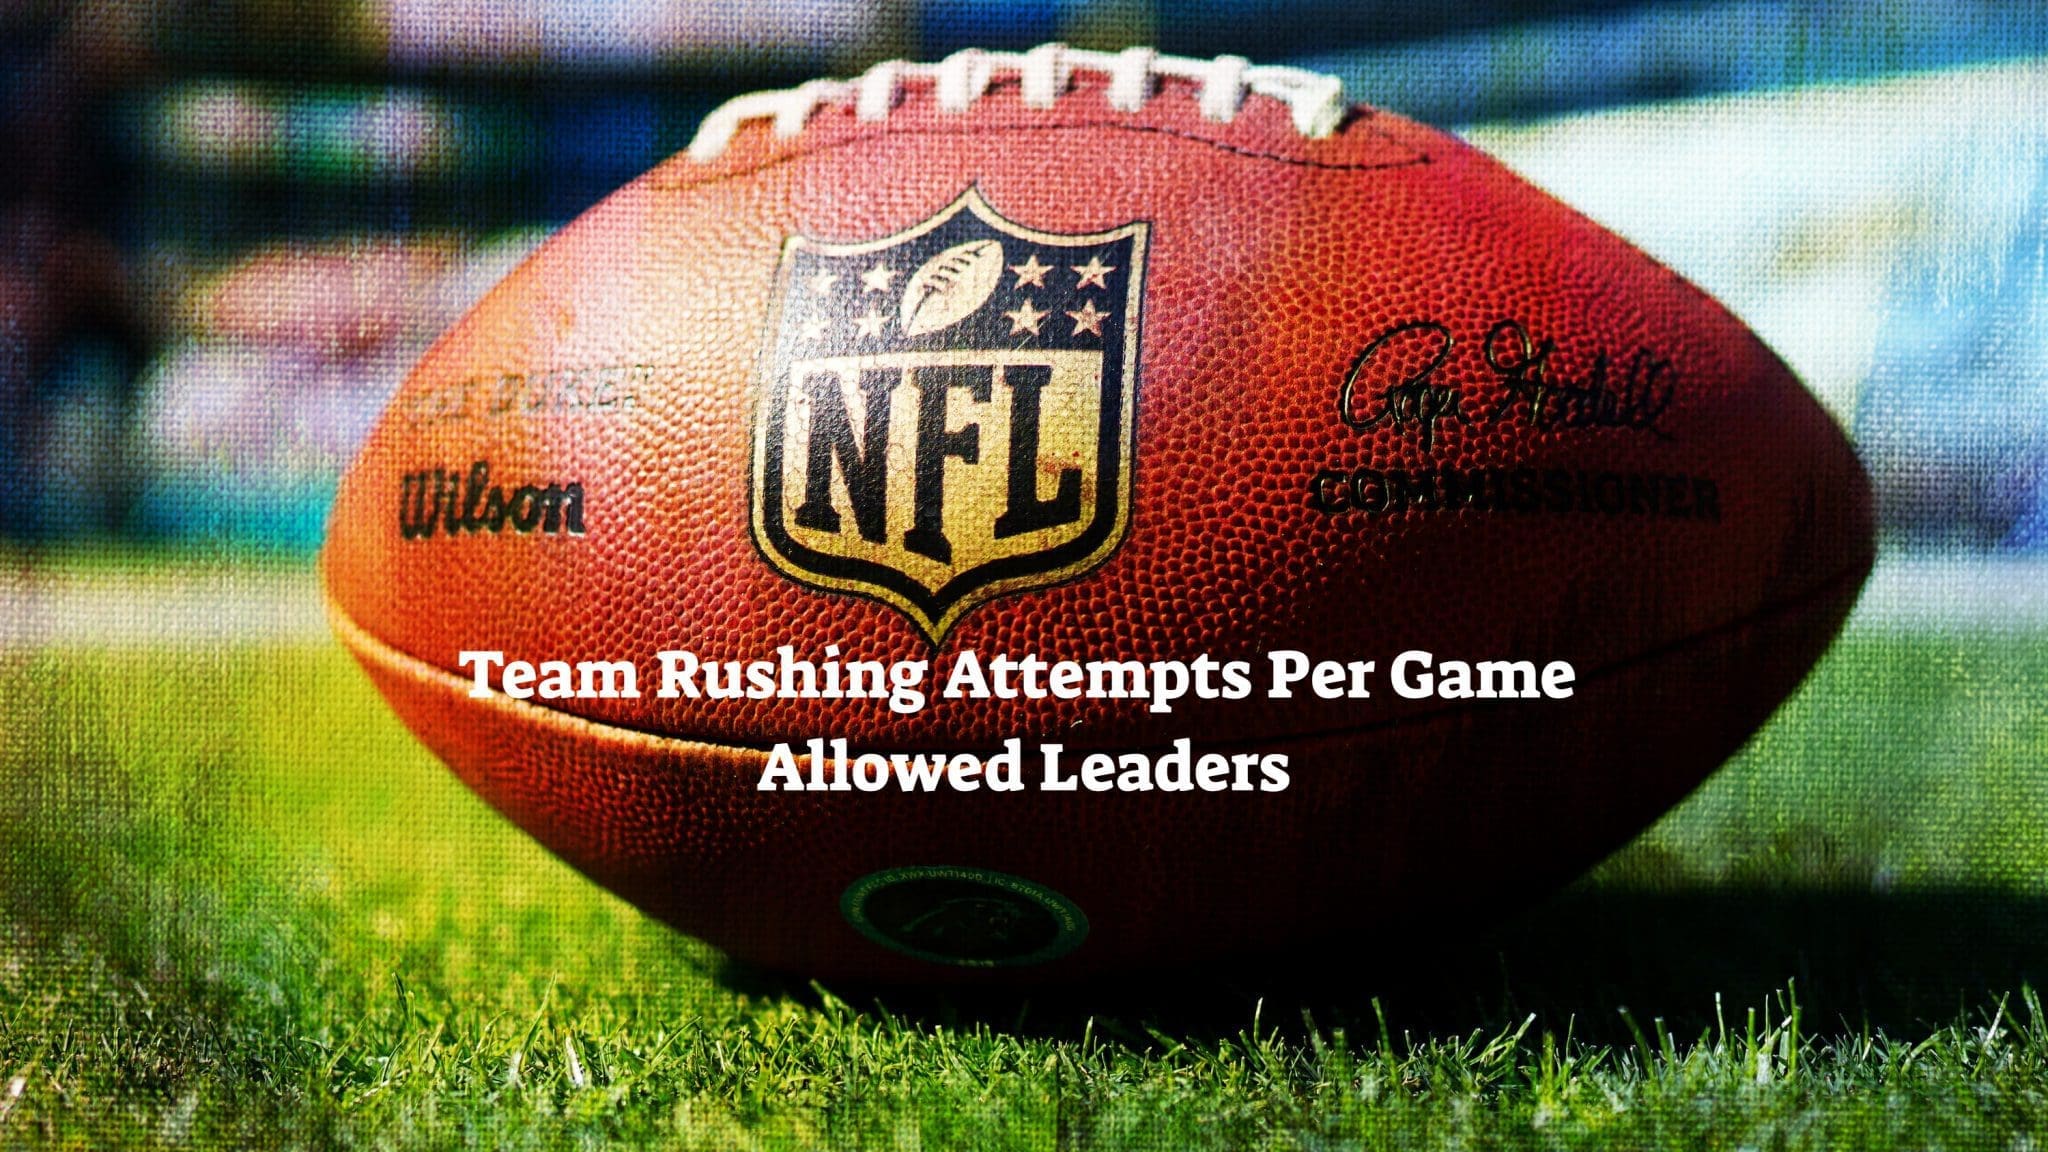 NFL Team Rushing Attempts Per Game Allowed Leaders 202324? Team Rankings